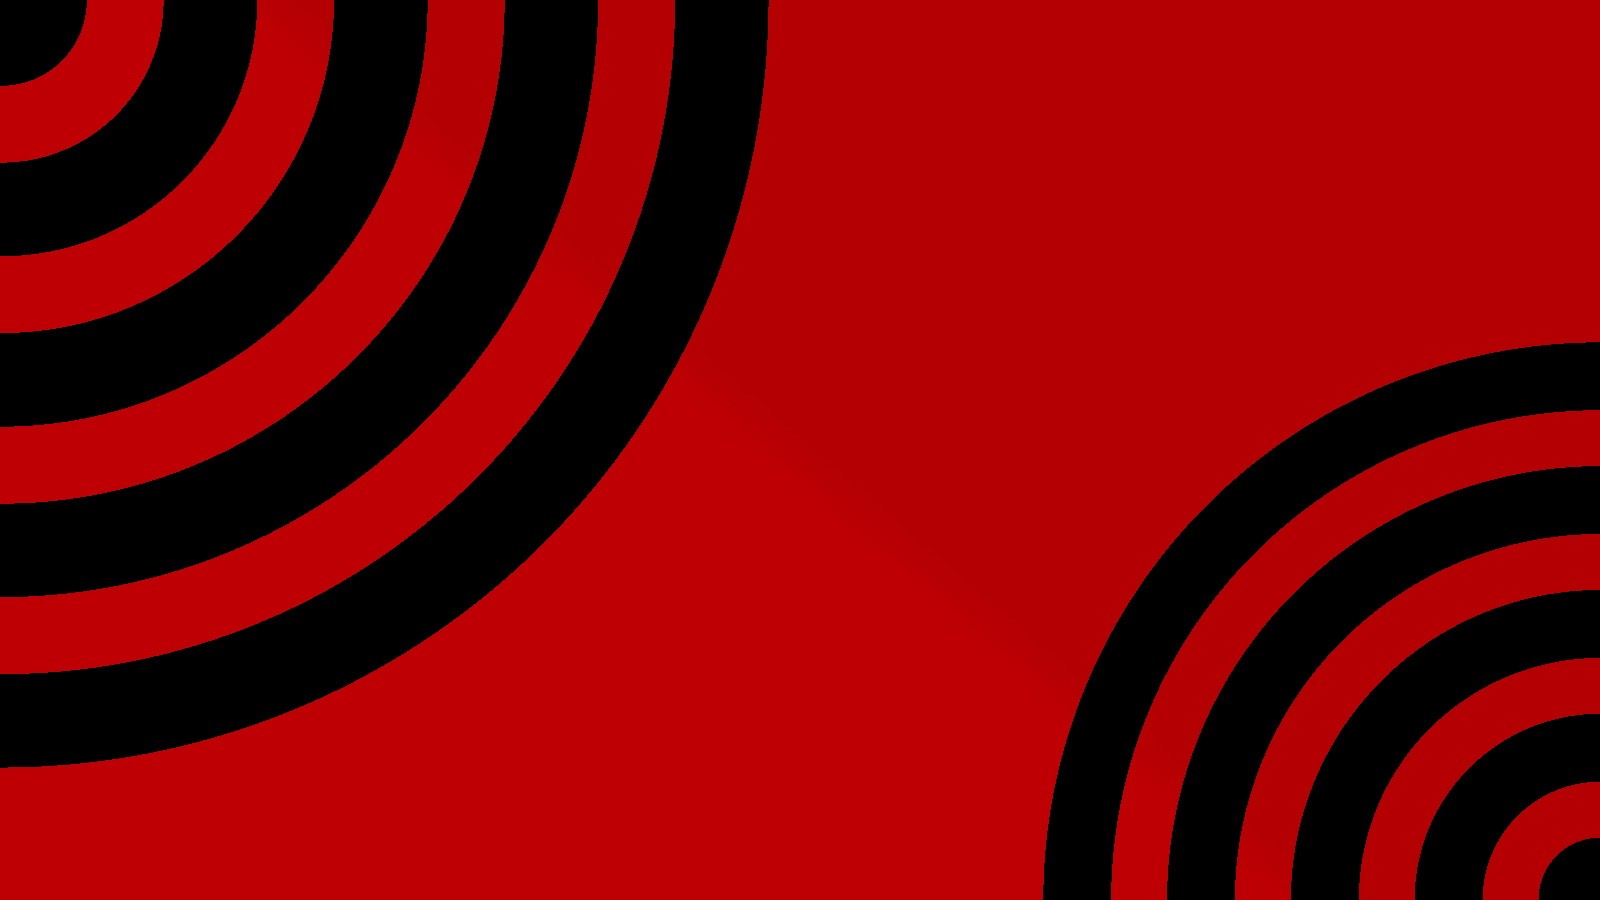 black, Red, Waves, Circles, Psychedelic, Simple, Background, Red, Background Wallpaper